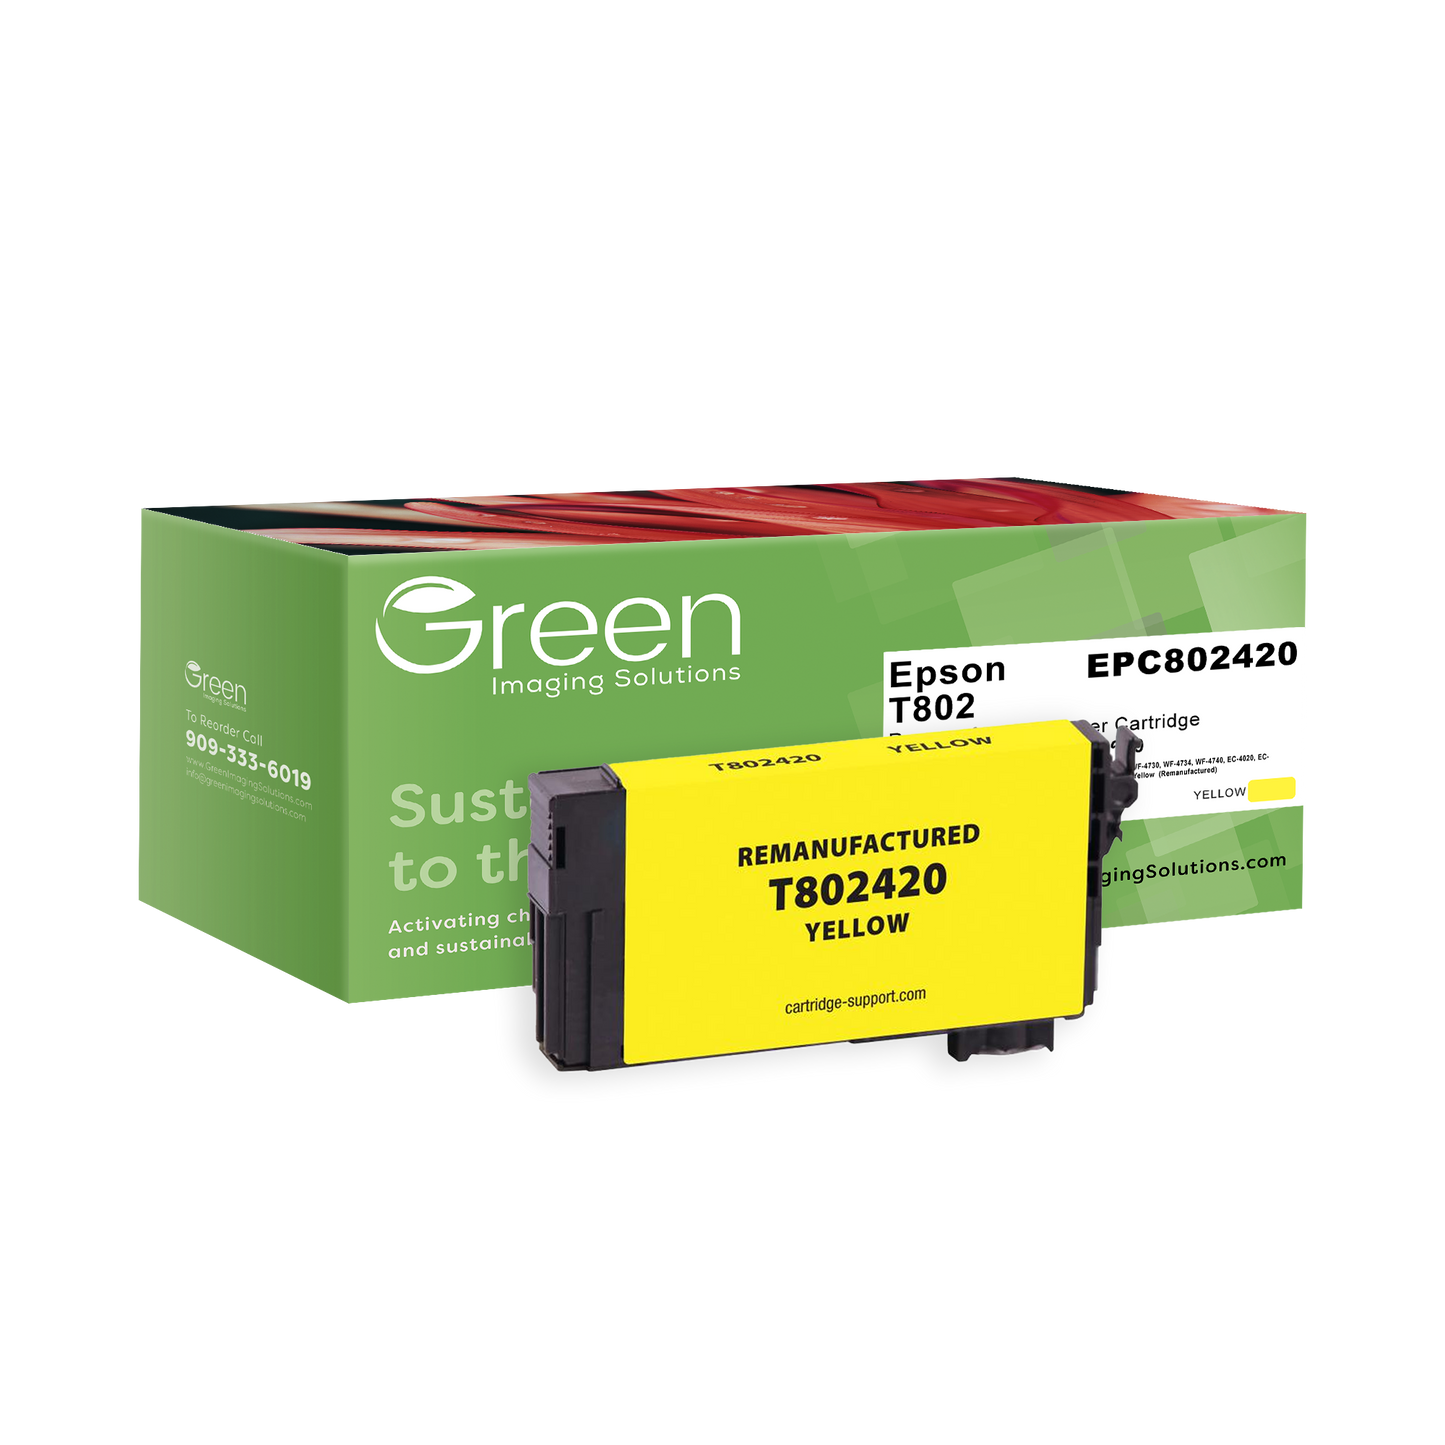 Green Imaging Solutions USA Remanufactured Yellow Ink Cartridge for Epson T802420